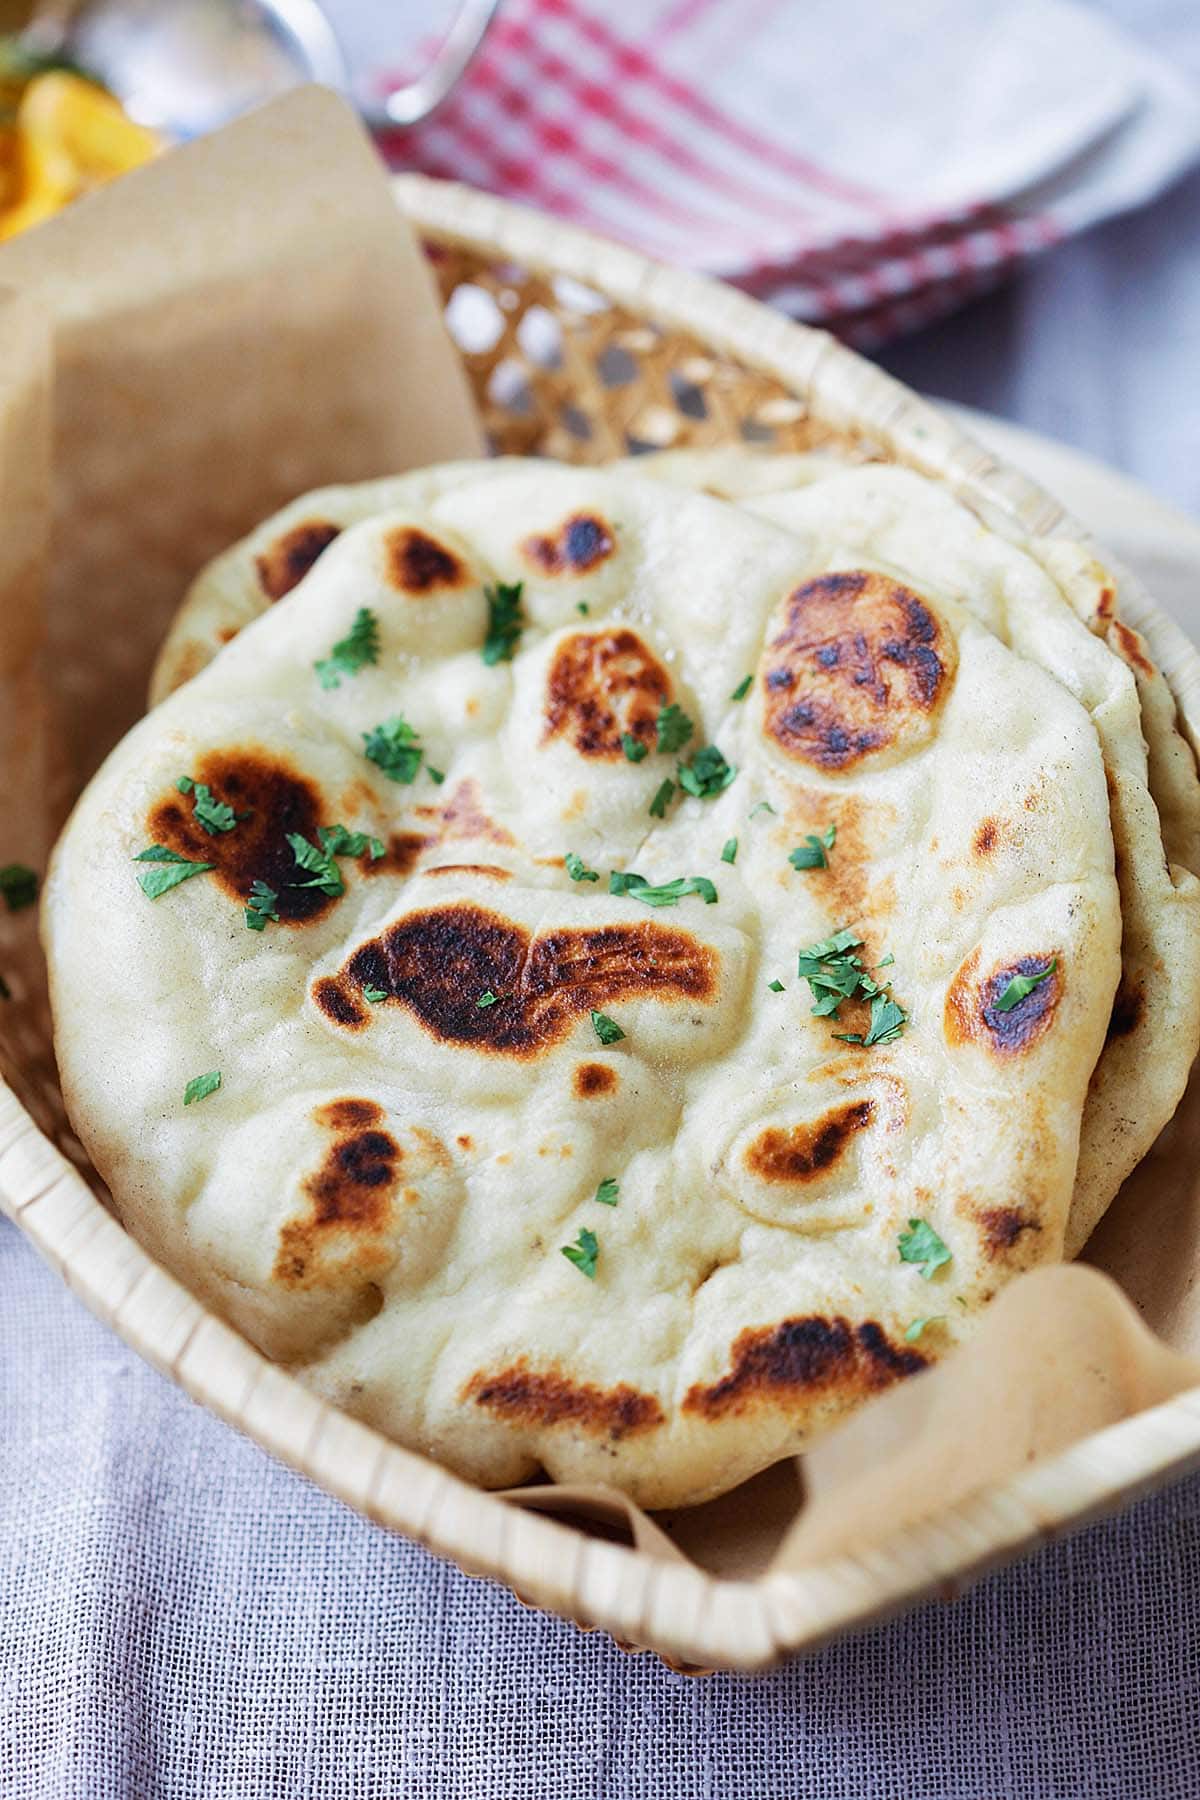 Fluffy and chewy naan with brown bubbly blisters in a bread basket. 